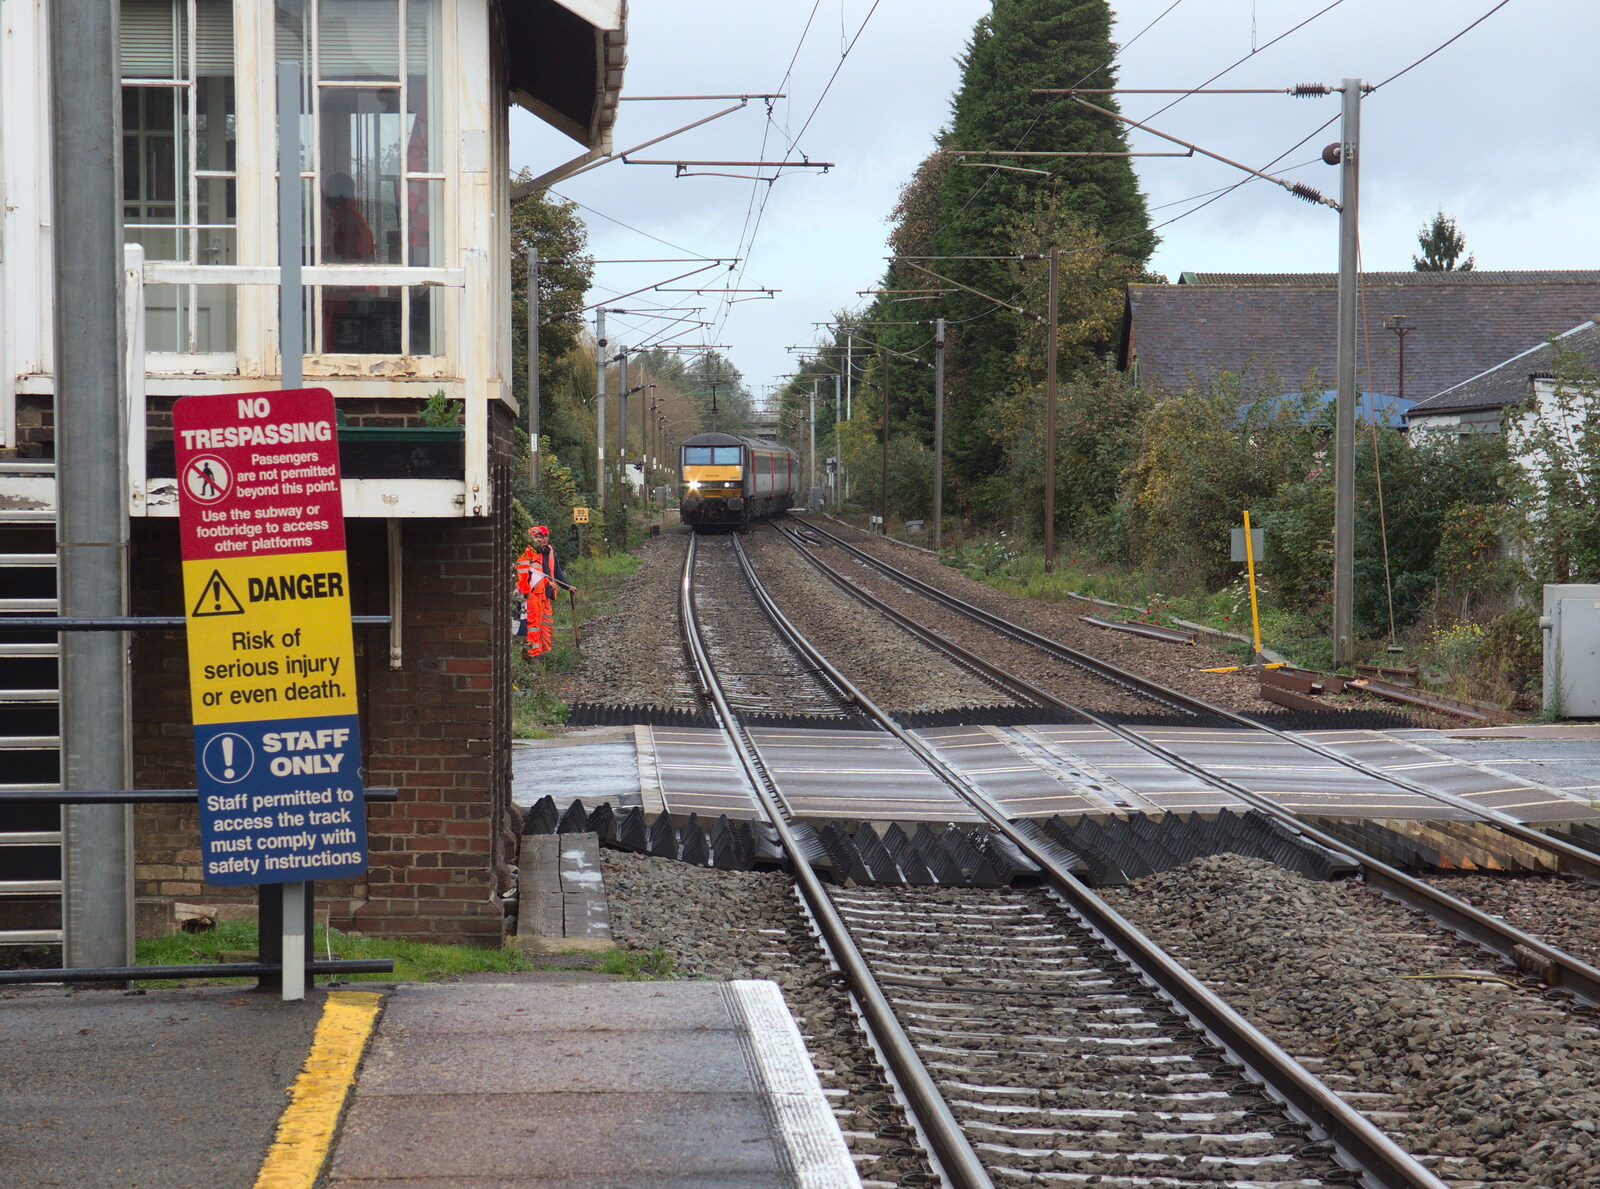 The following train crosses the line from (Very) Long Train (Not) Running, Stowmarket, Suffolk - 21st October 2014